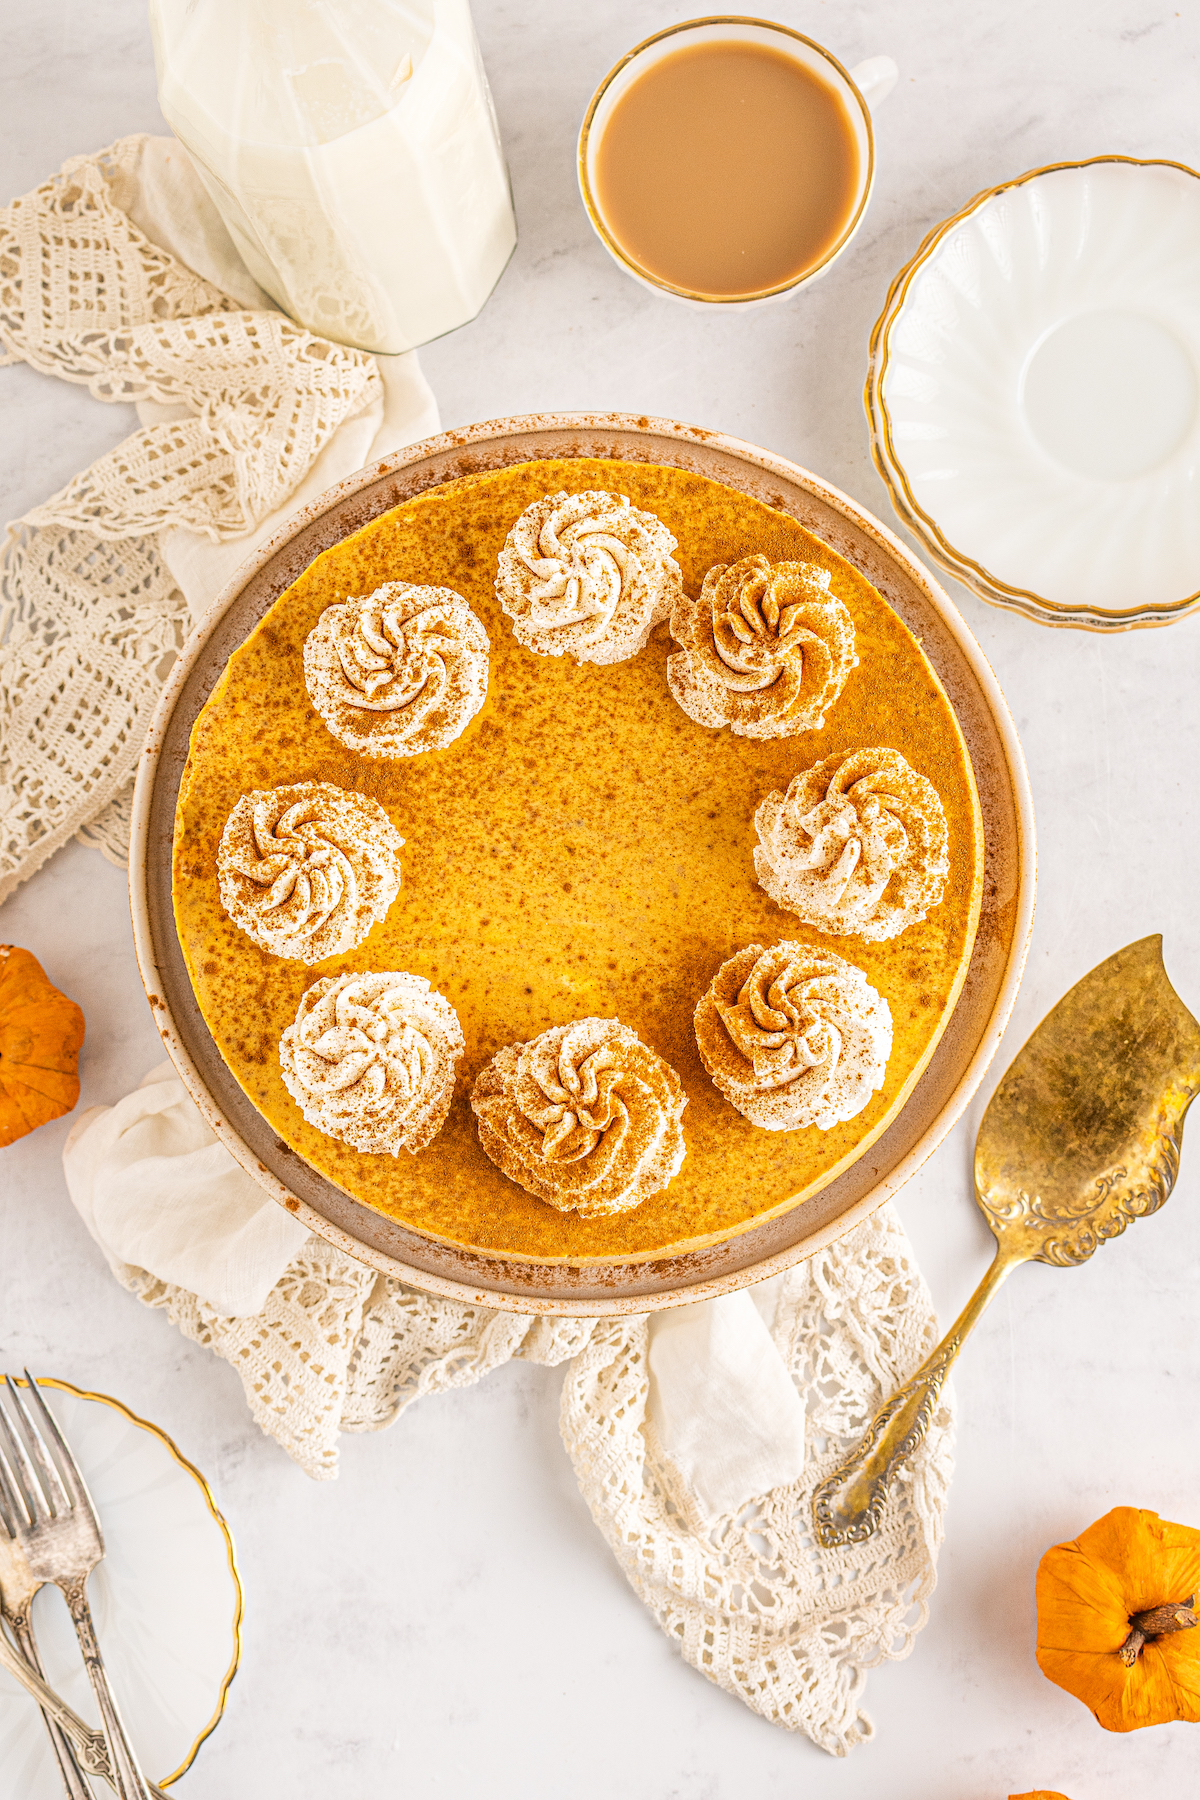 Overhead shot of a pumpkin-spice cheesecake topped with cinnamon and piped whipped cream.